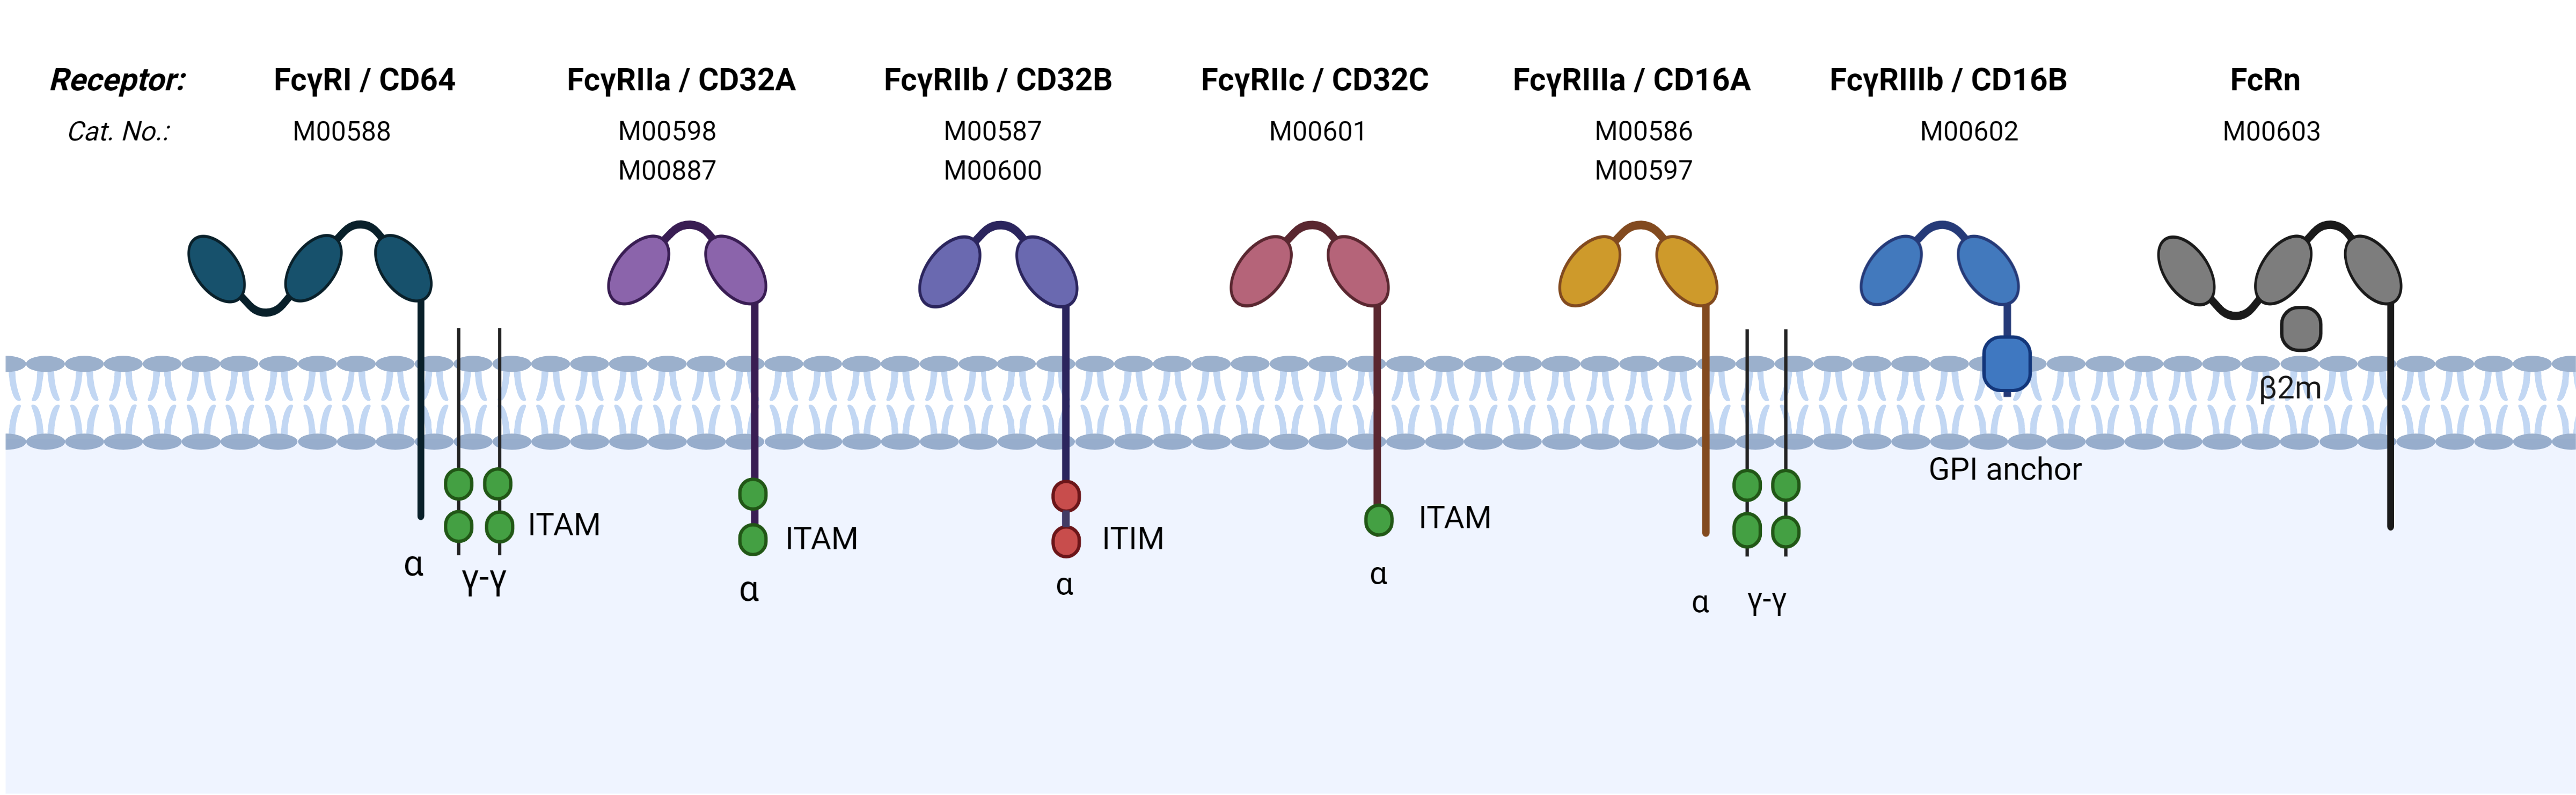 Schematic representation of human Fc��Rs and FcRn on cell surface